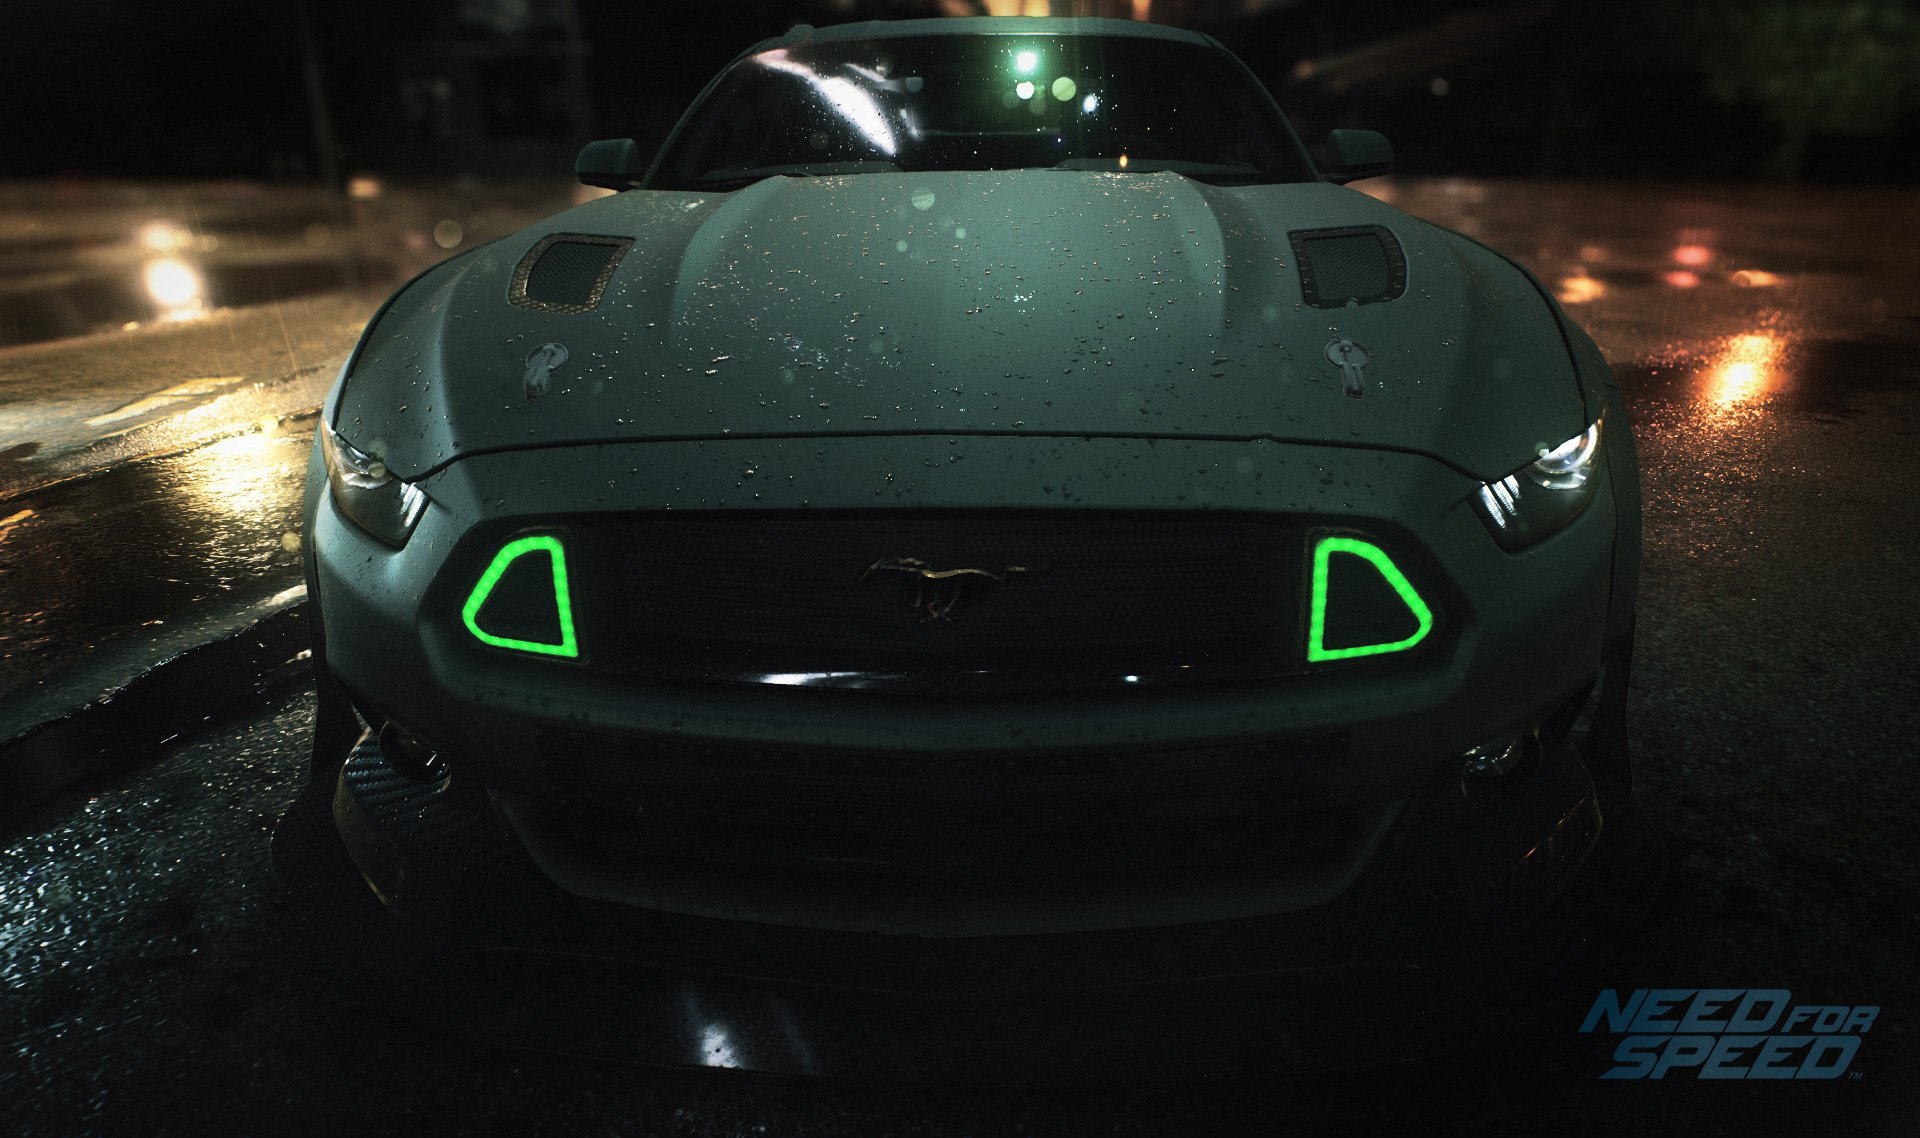 “Need for Speed” Reboot Teased - More Info Coming This E3